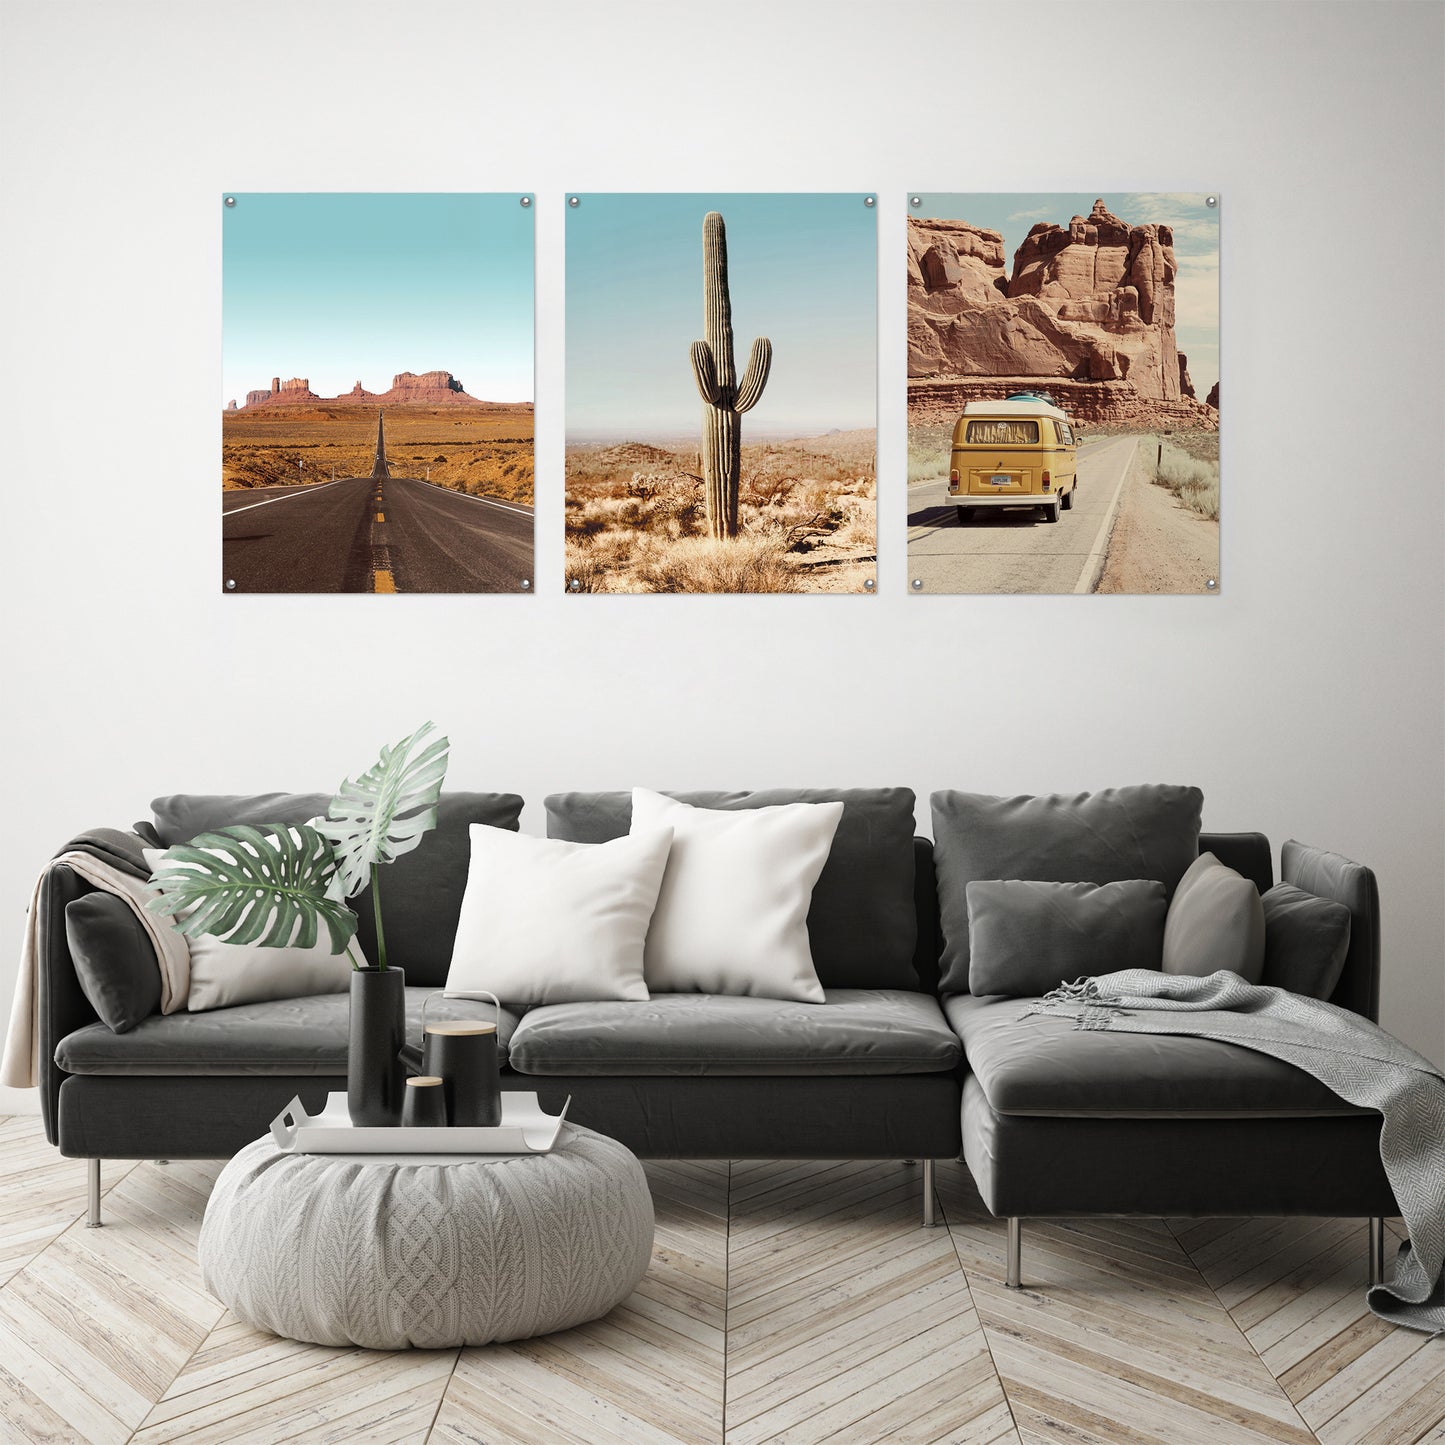 (Set of 3) Triptych Wall Art Desert Drives Photography by Tanya Shumkina - Poster Print